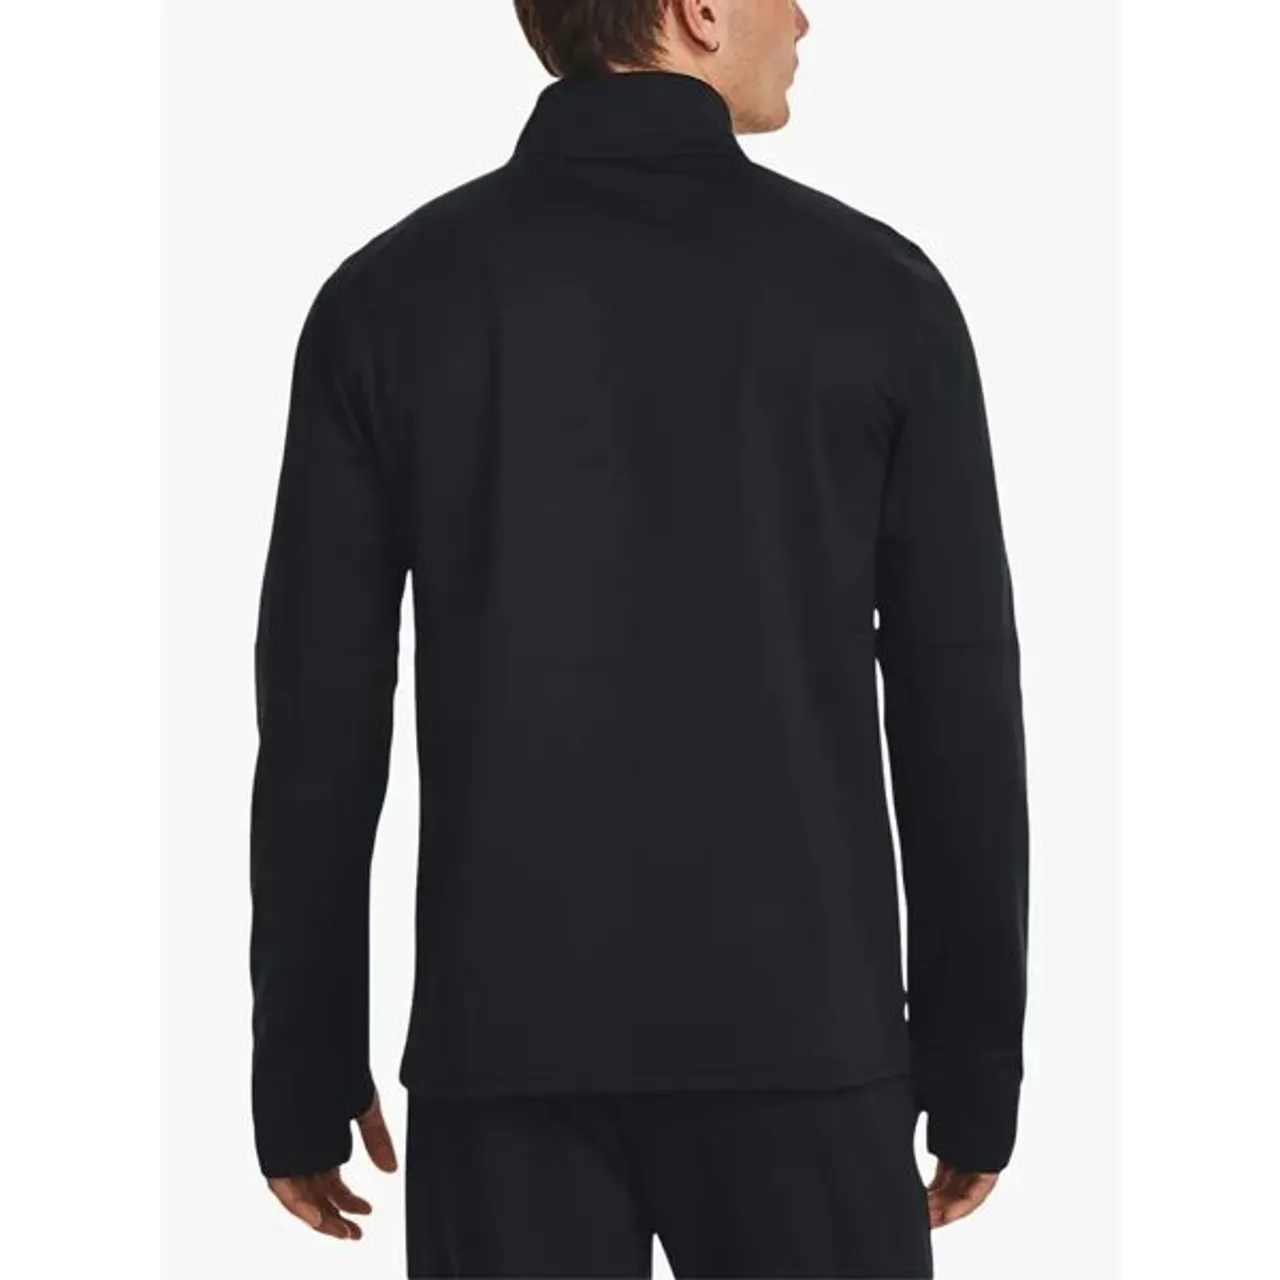 Under Armour Challenger Midlayer 1/4 Zip Long Sleeve Gym Top, Black/White - Black/White - Male